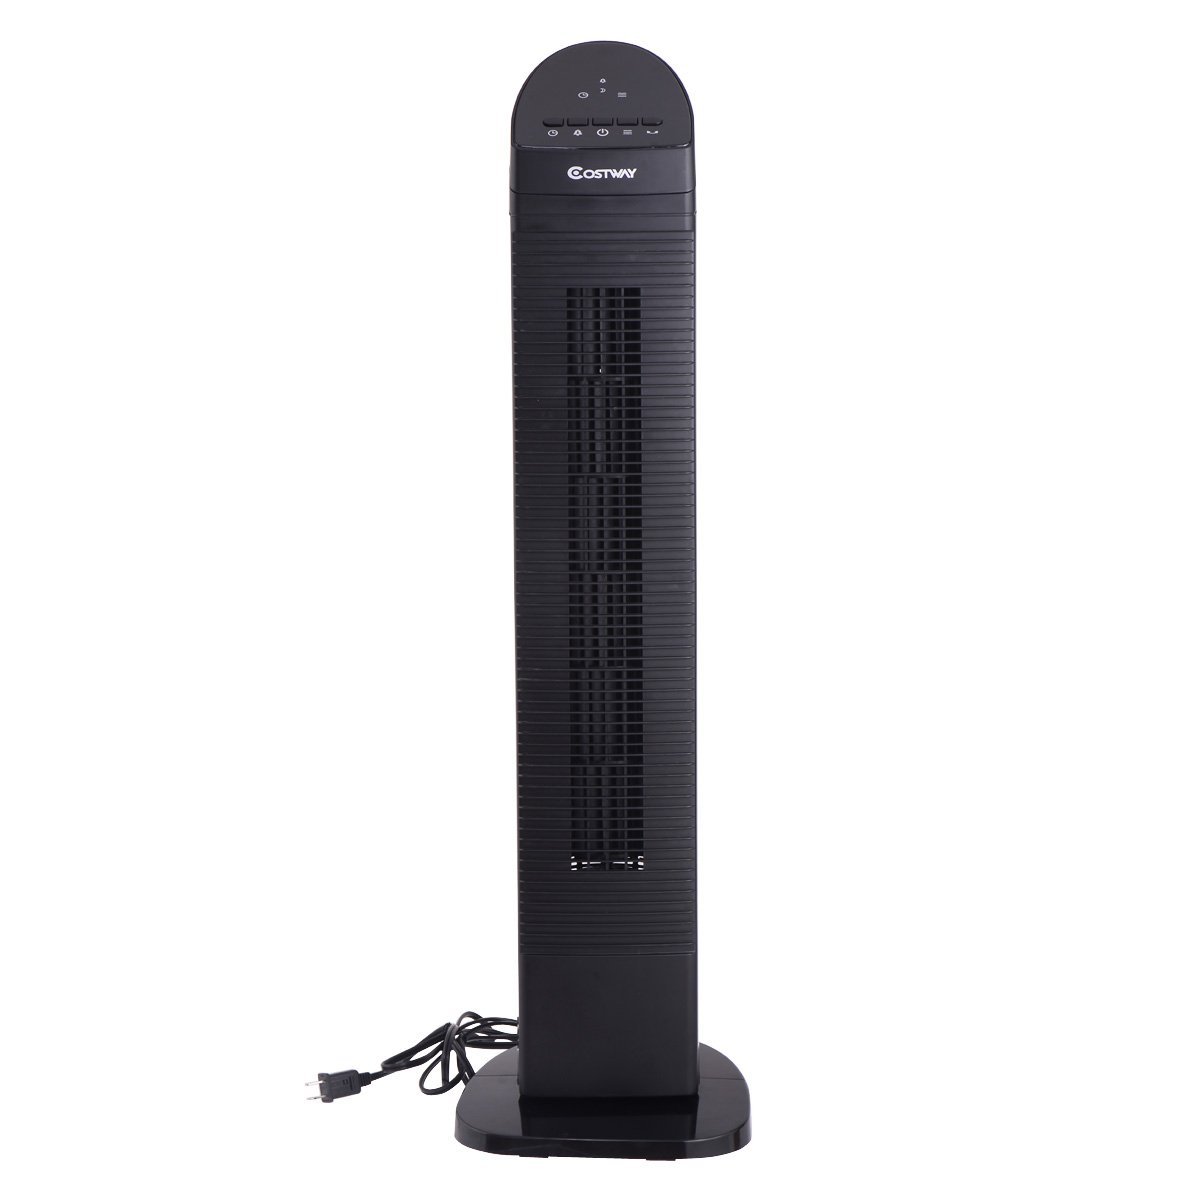 Costway 35″ Oscillating Tower Fan 3 Speed with Remote Control – Just $39.99!